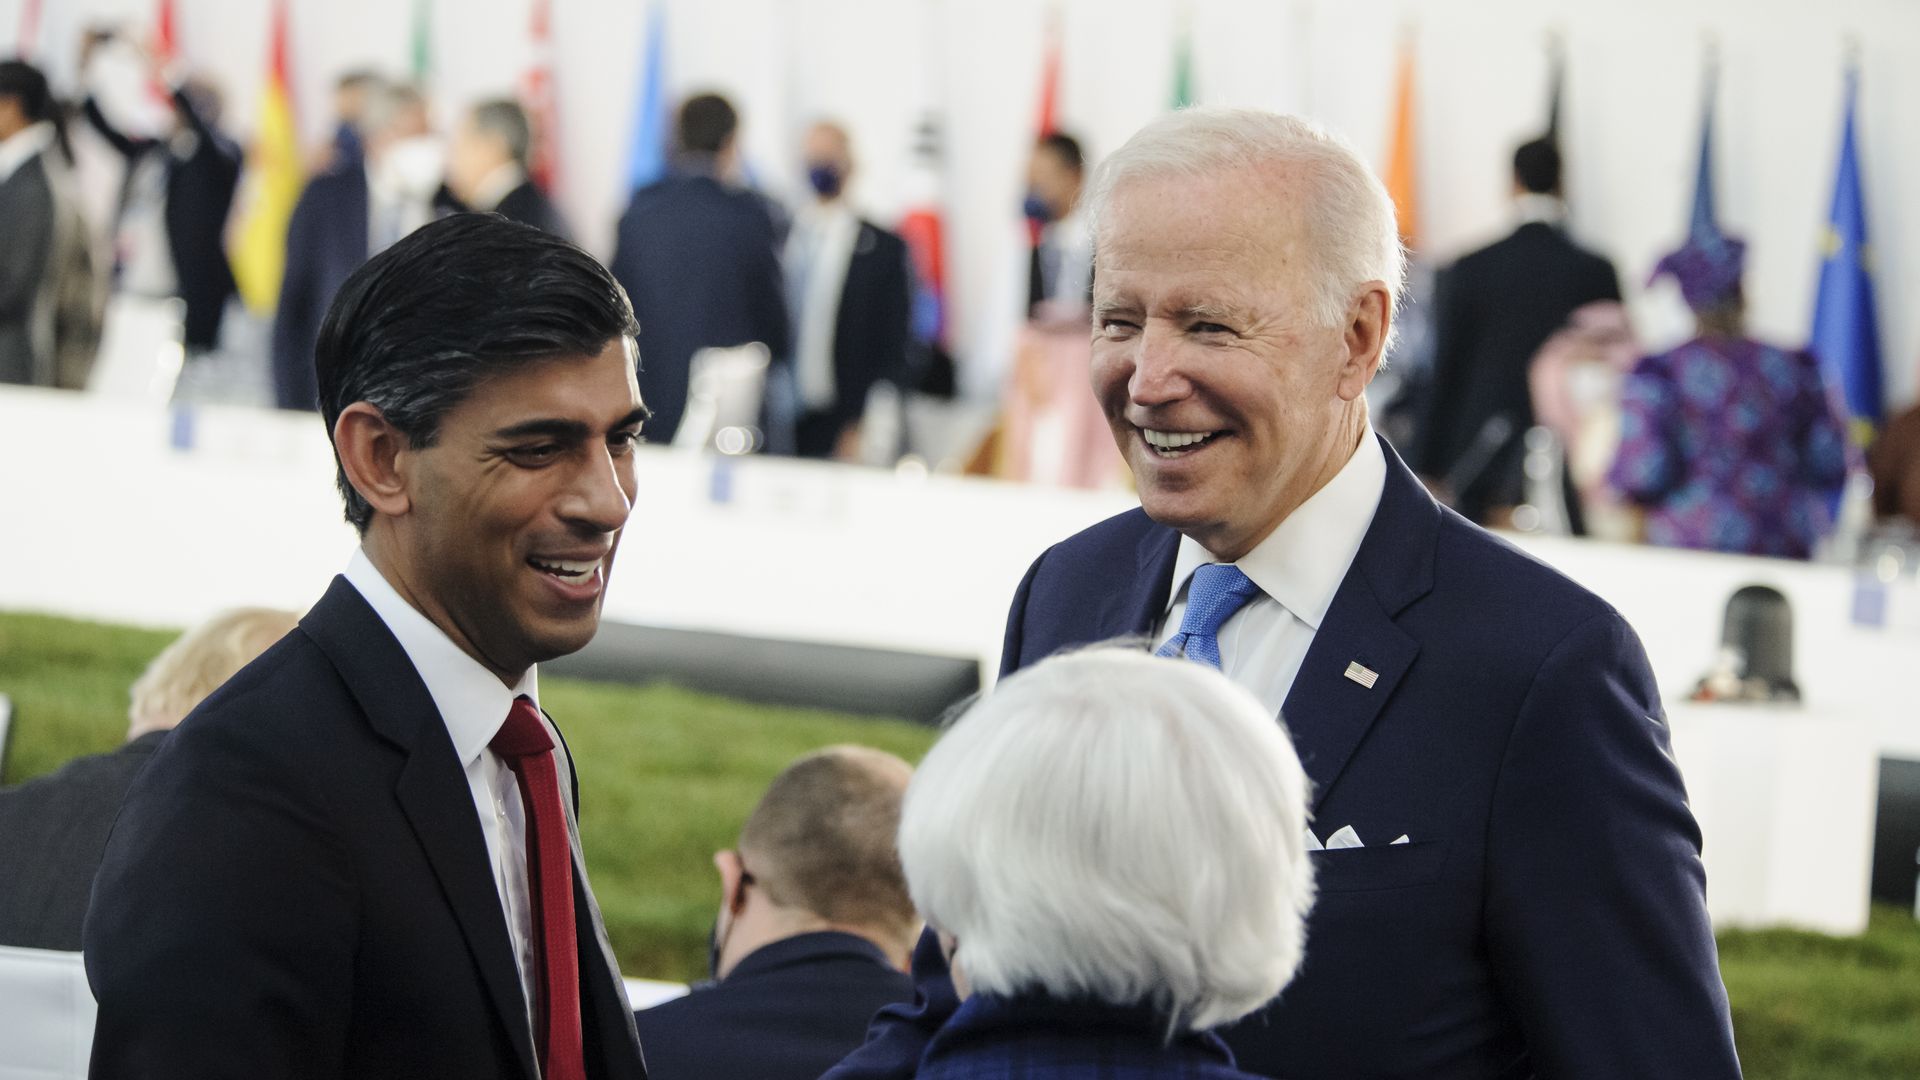  Then-UK Chancellor of the Exchequer, Rishi Sunak, and President Biden at the G20 Summit in 2021